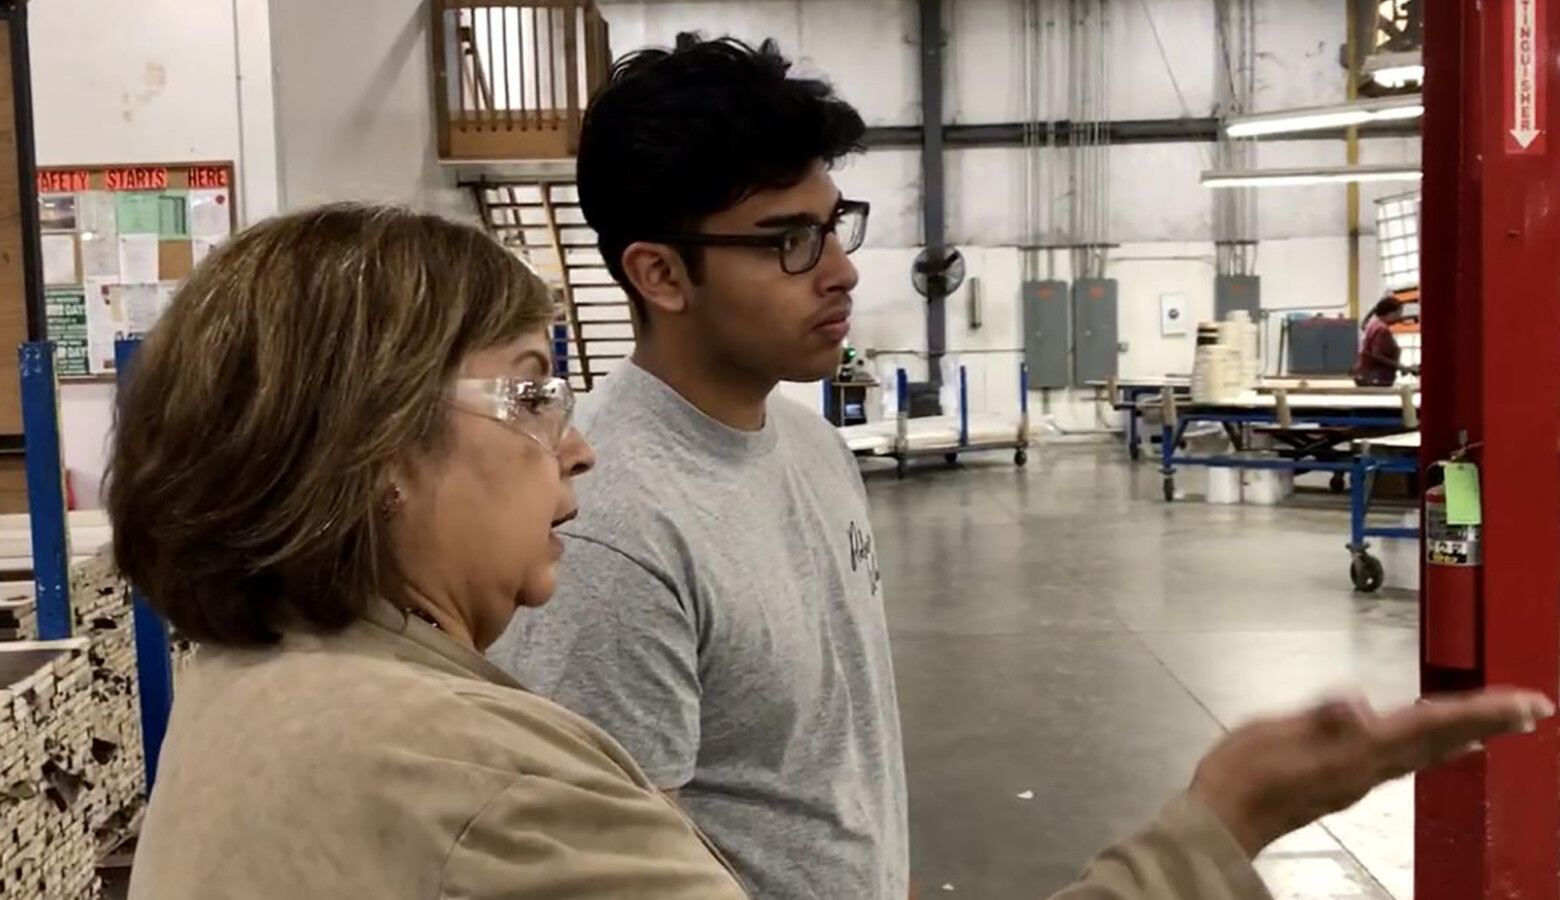 Chris Camacho, a youth apprentice in a similar program in Elkhart County, learns about the operations of the factory on his first day. (Justin Hicks/IPB News)